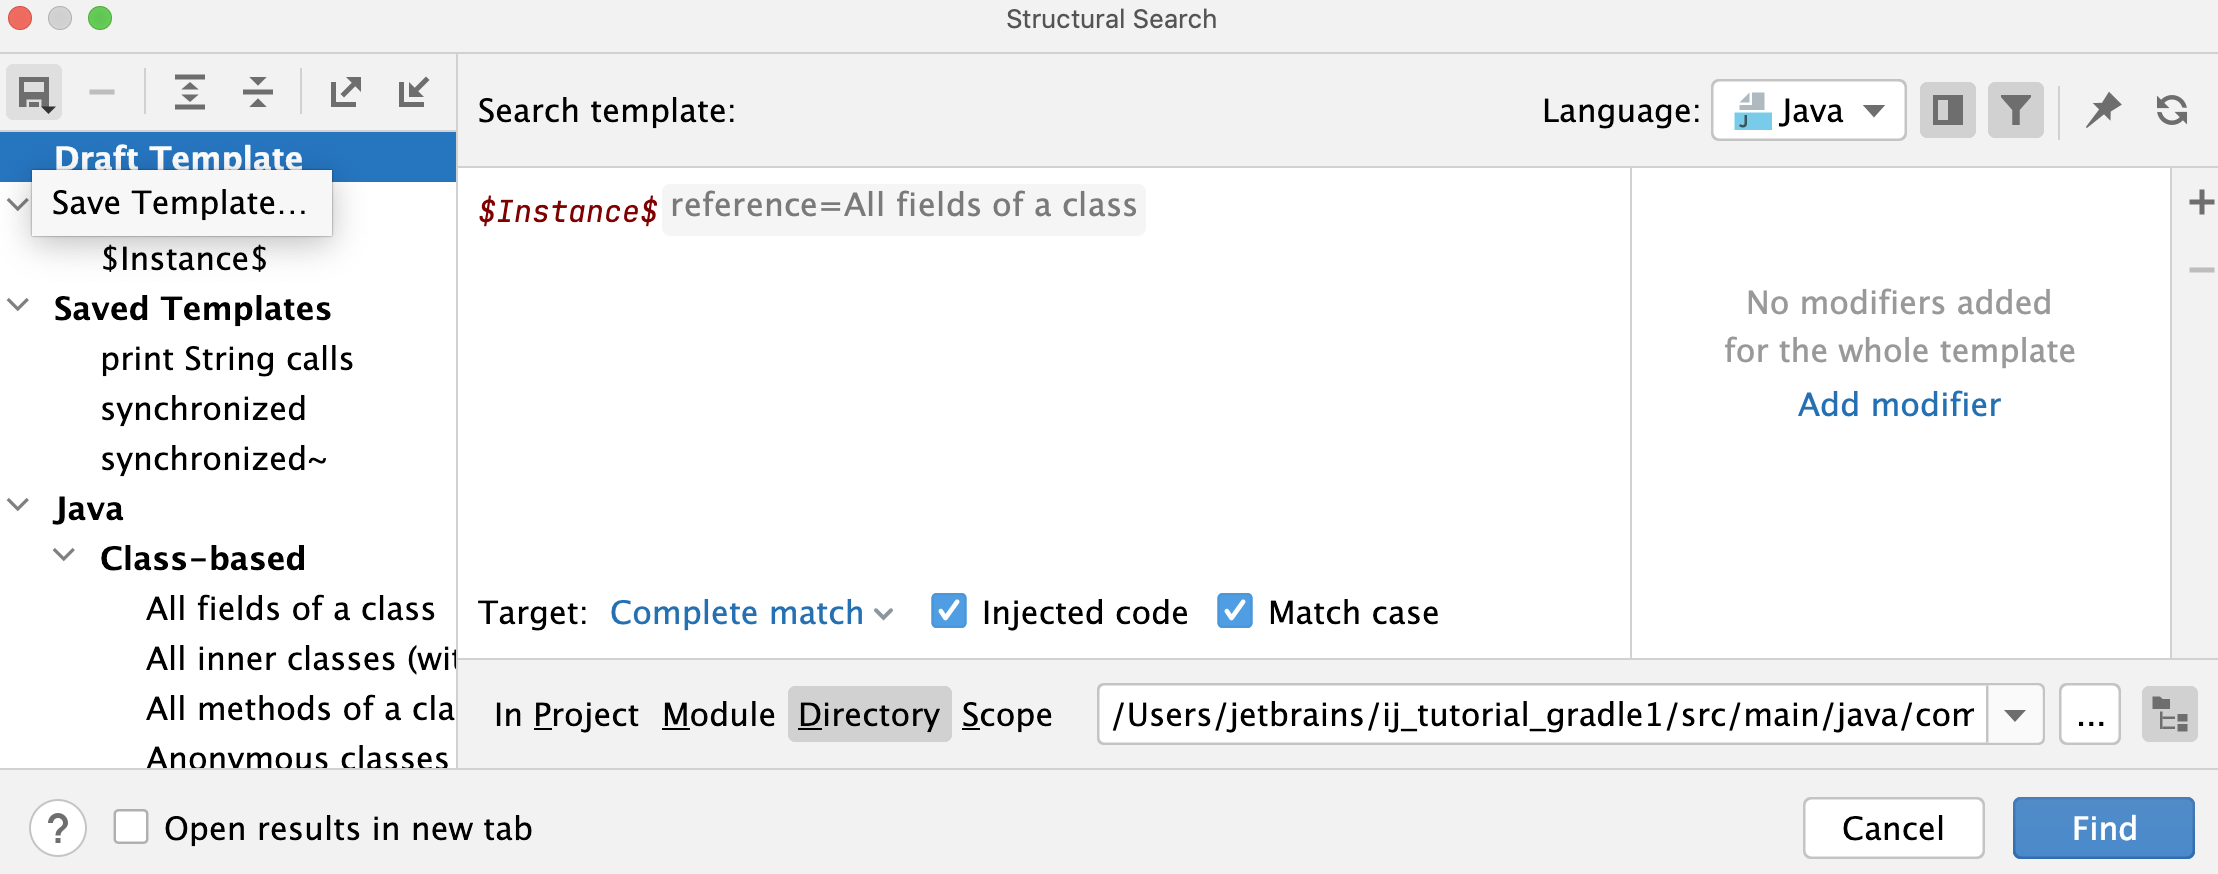 Structural Search dialog